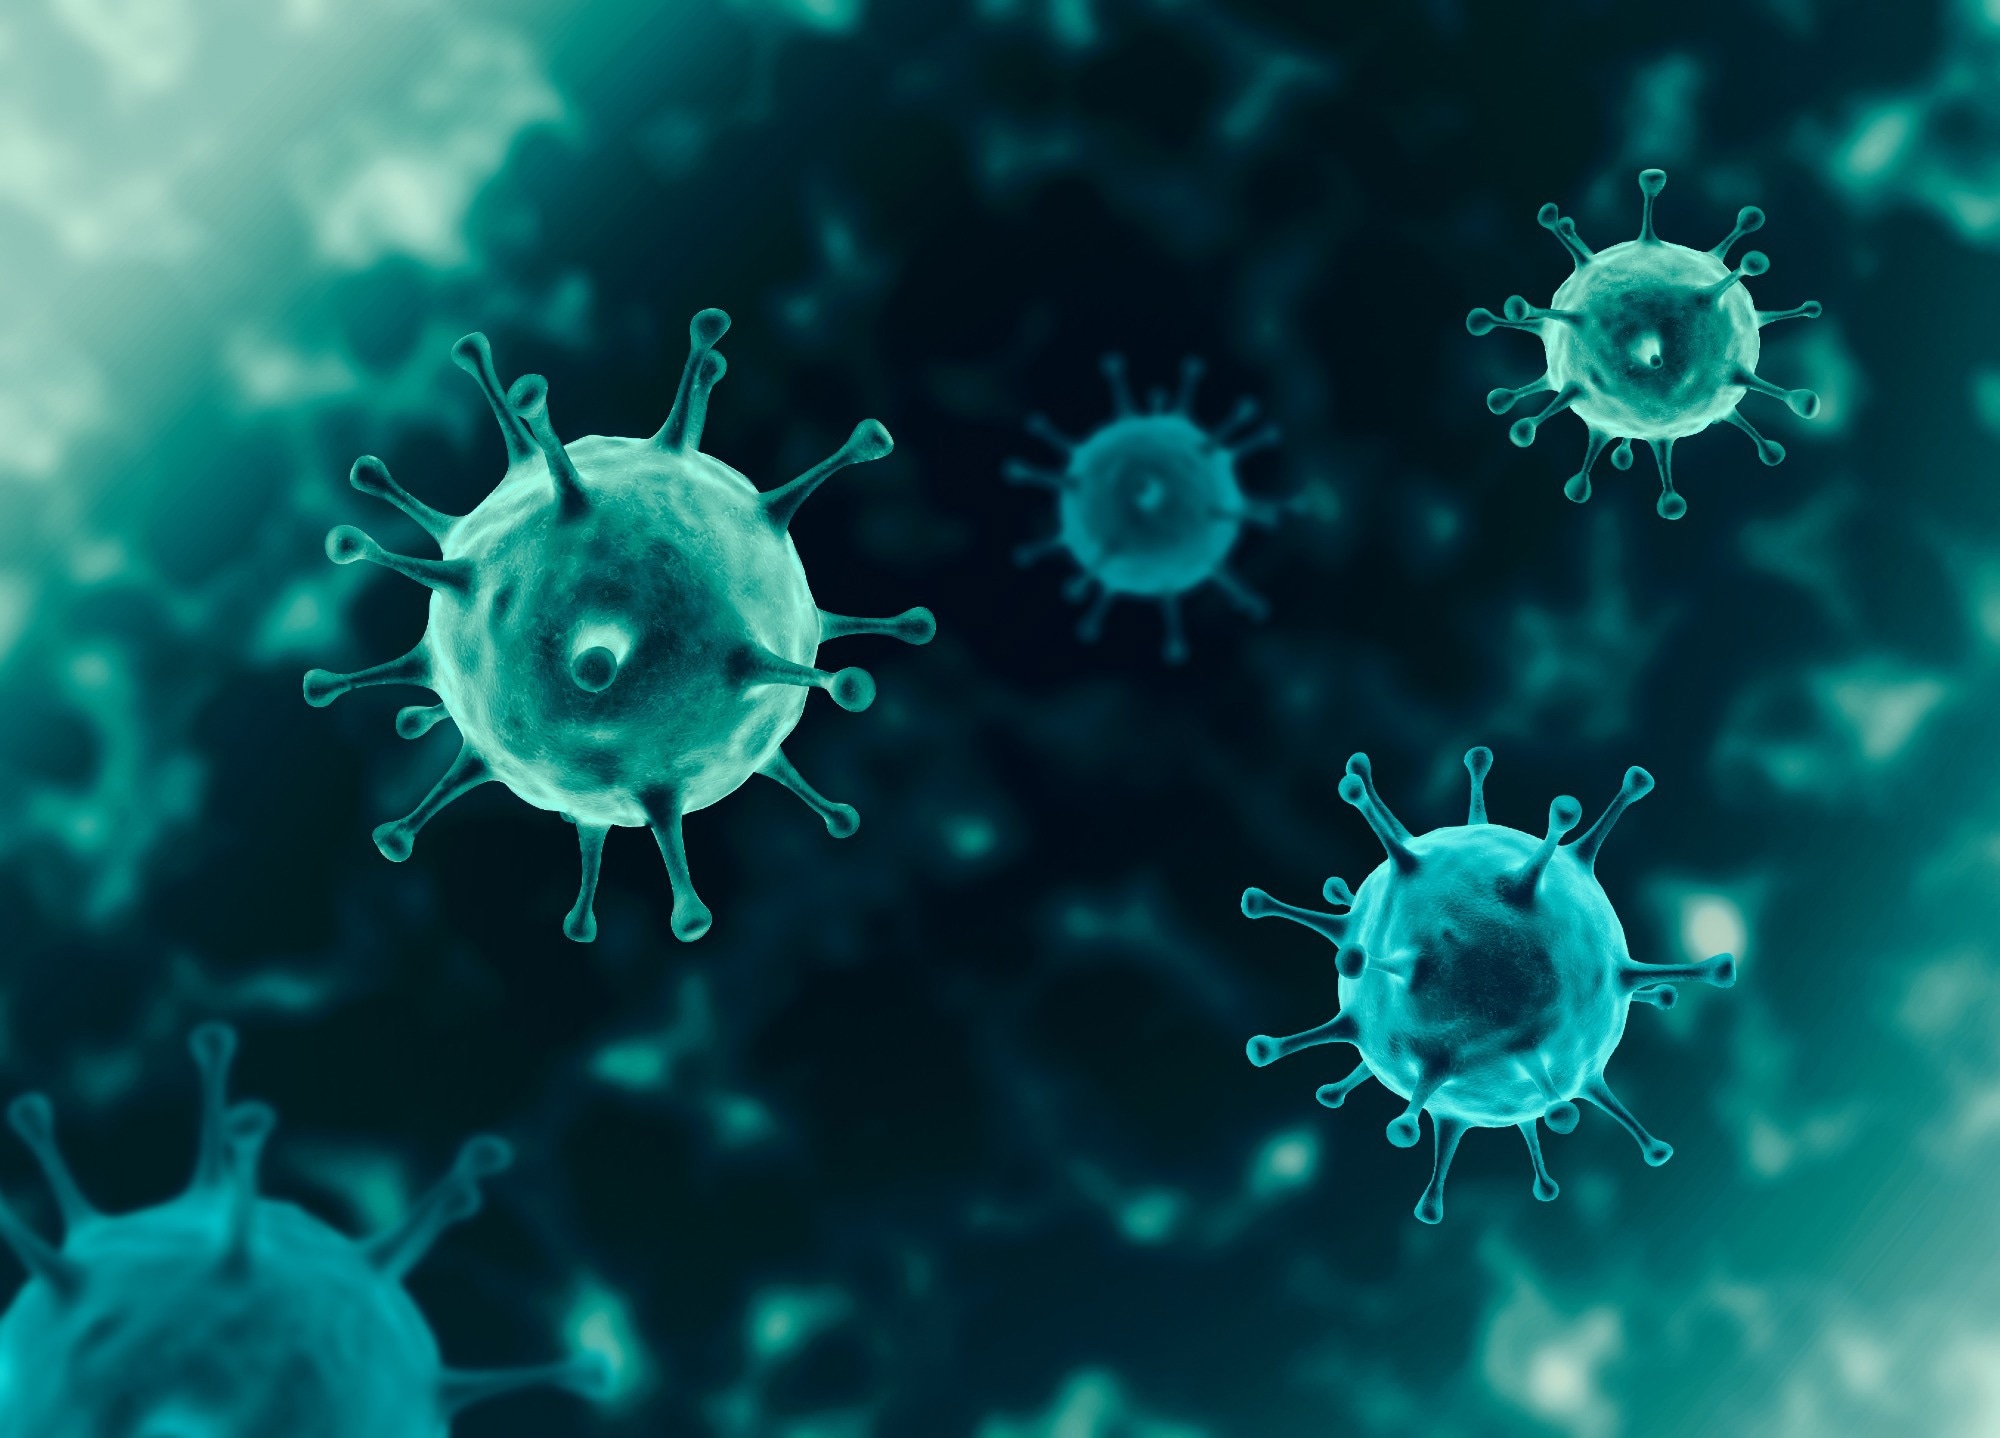 Study: Comparison of replicating and nonreplicating vaccines against SARS-CoV-2. Image Credit: Nhemz/Shutterstock